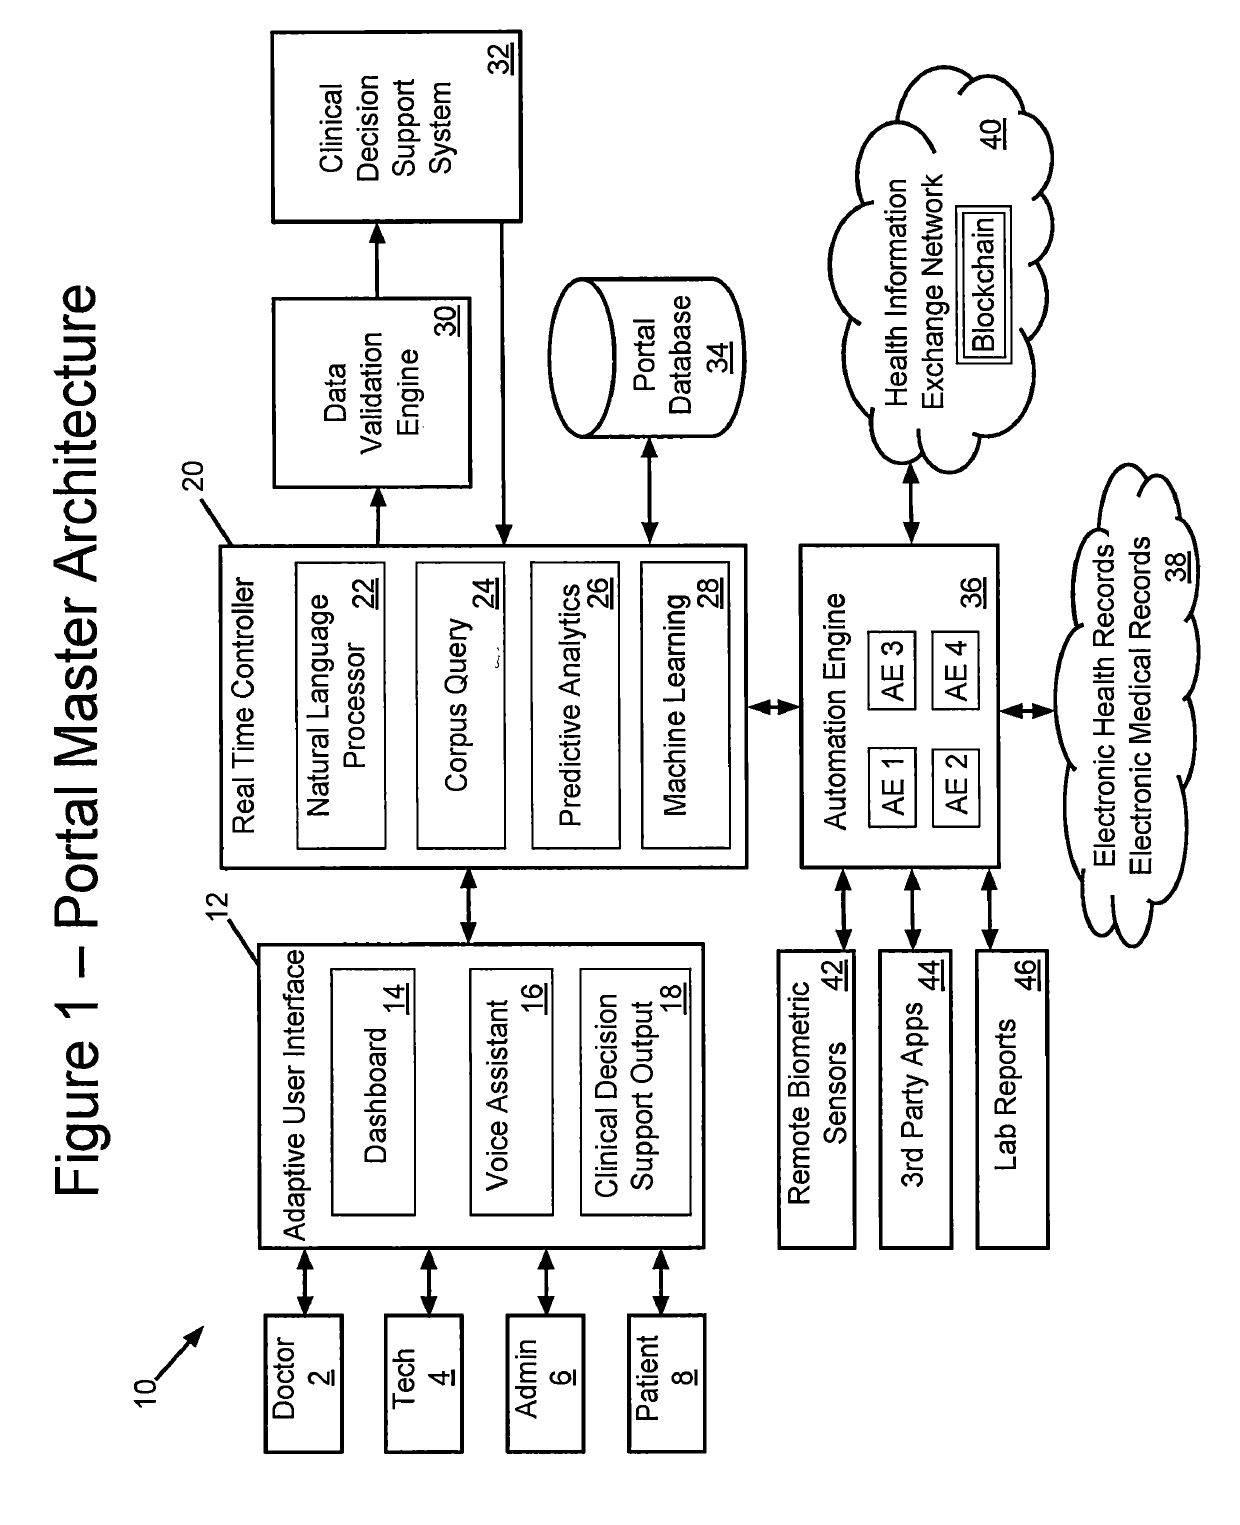 Methods and System for Real Time, Cognitive Integration with Clinical Decision Support Systems featuring Interoperable Data Exchange on Cloud-Based and Blockchain Networks